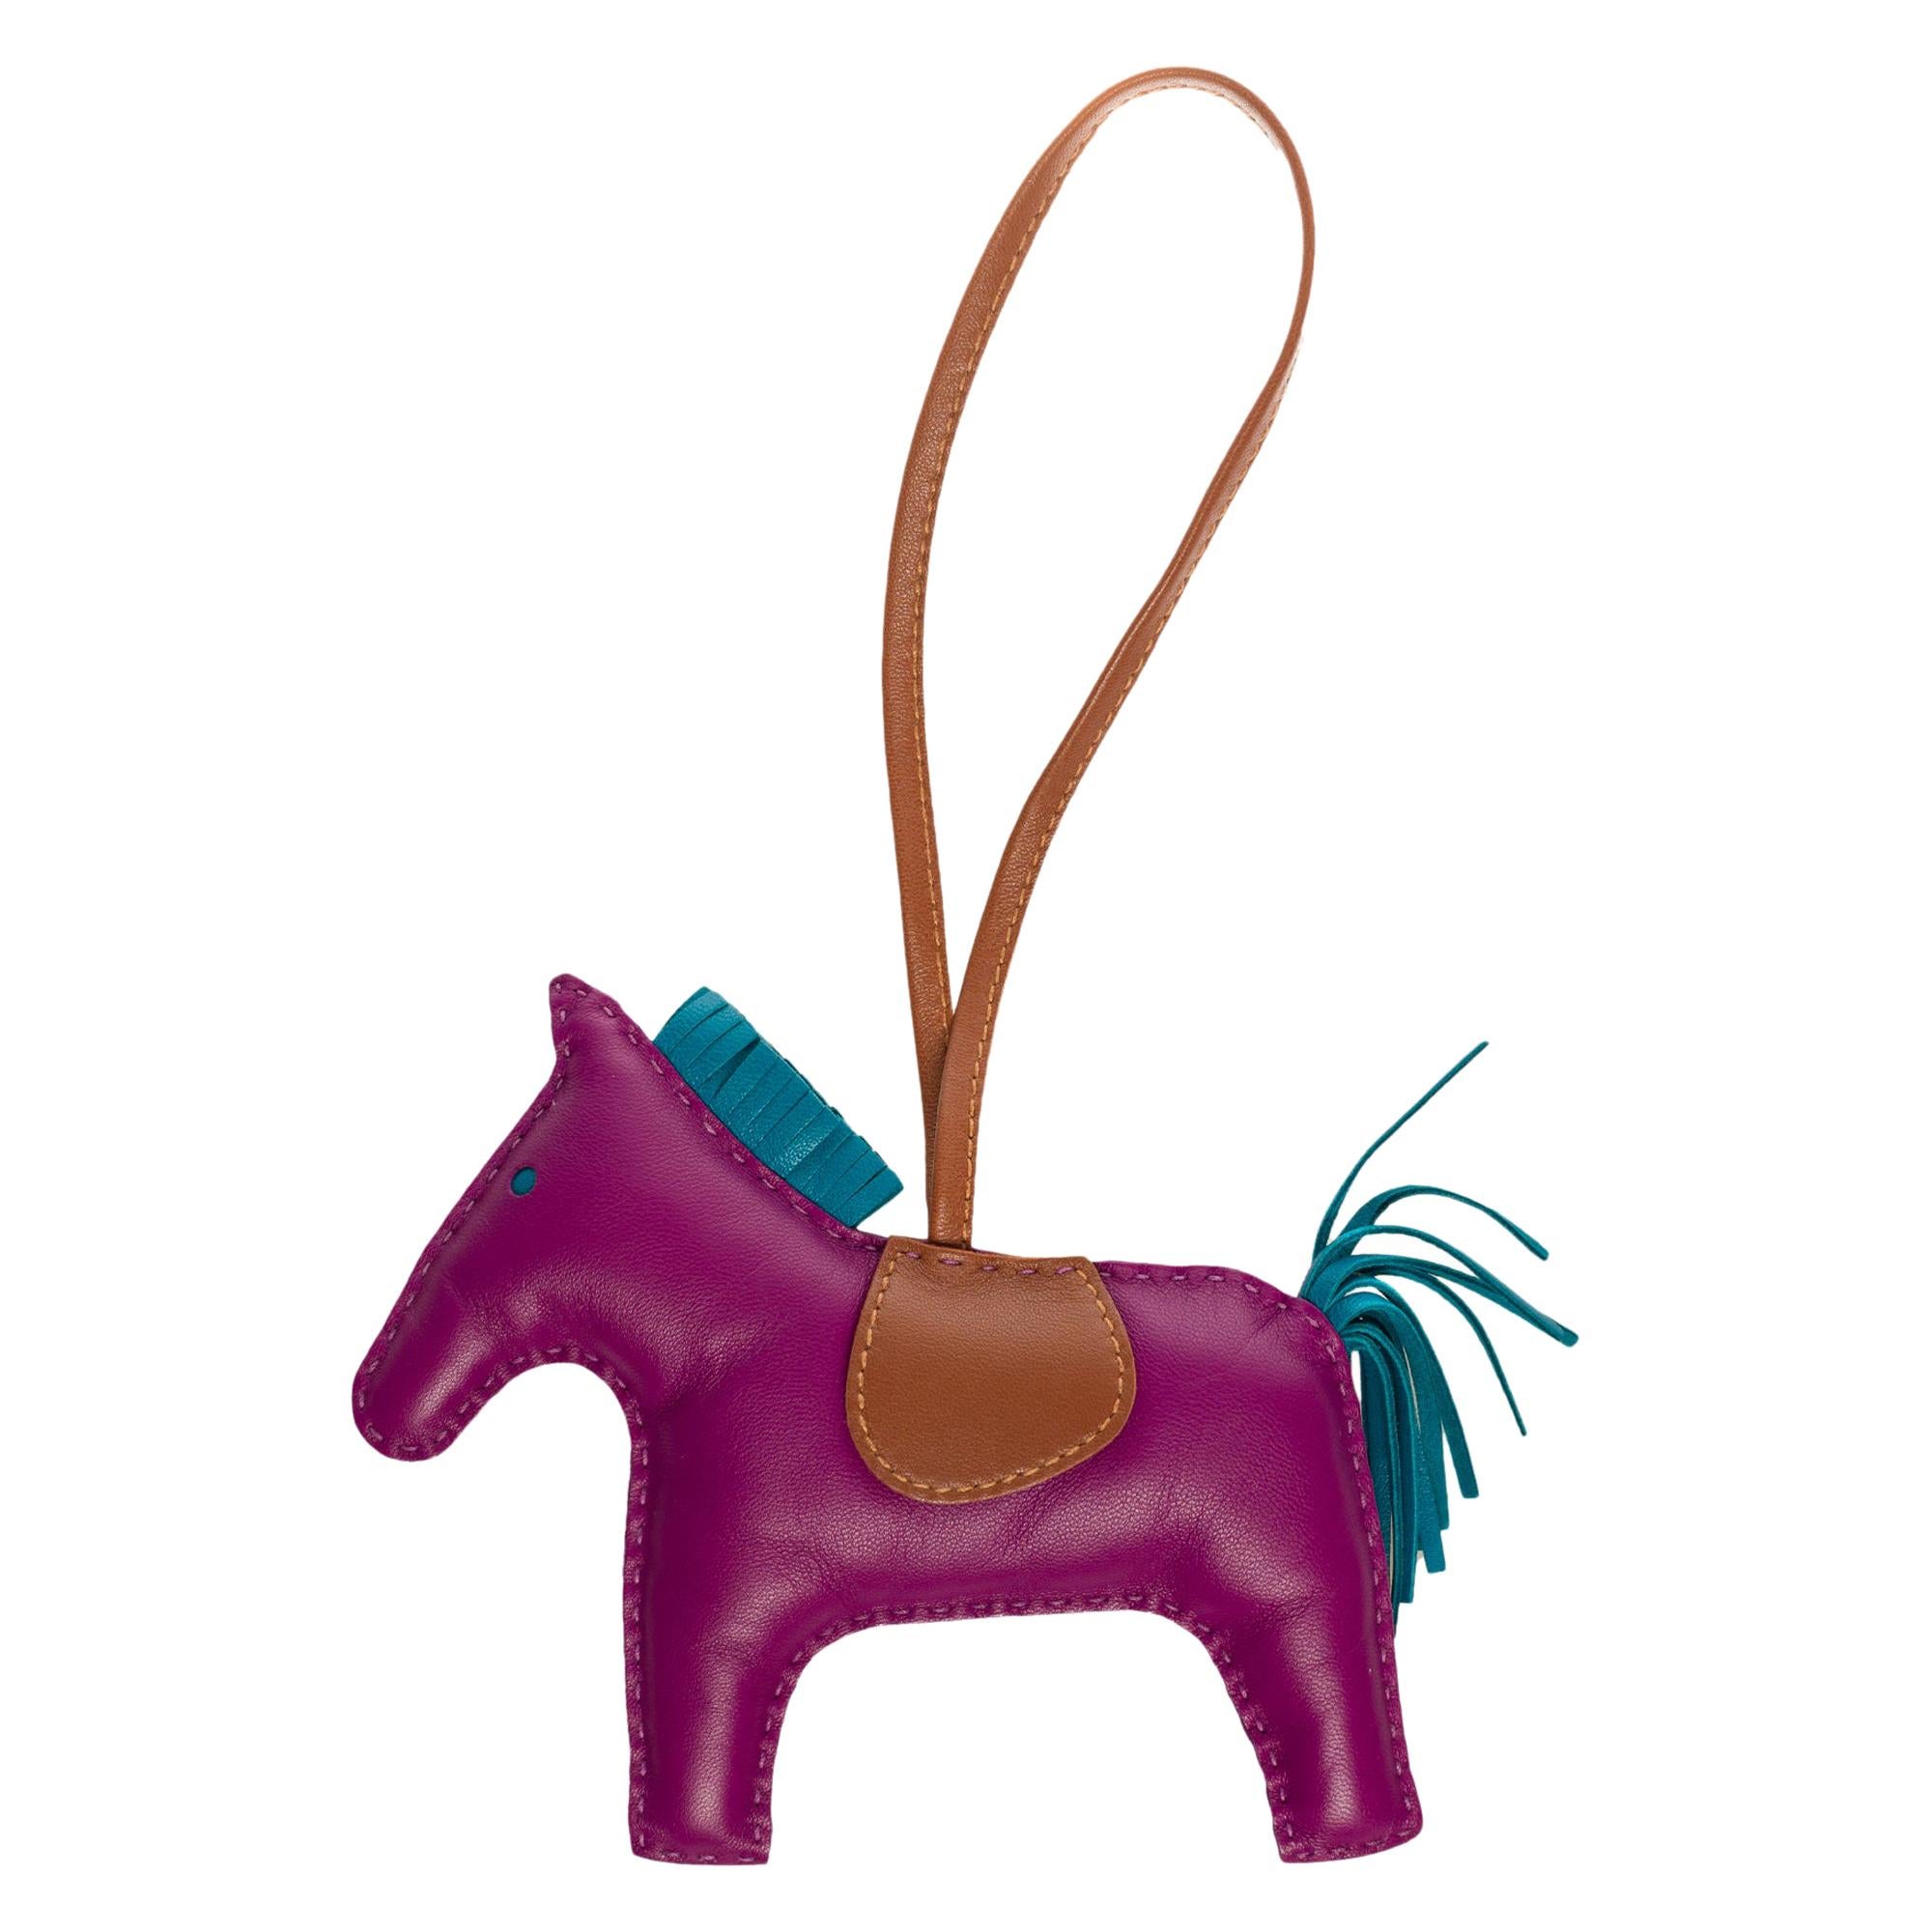 Amazing Hermès Rodeo bag Charm in purple, brown and blue leather